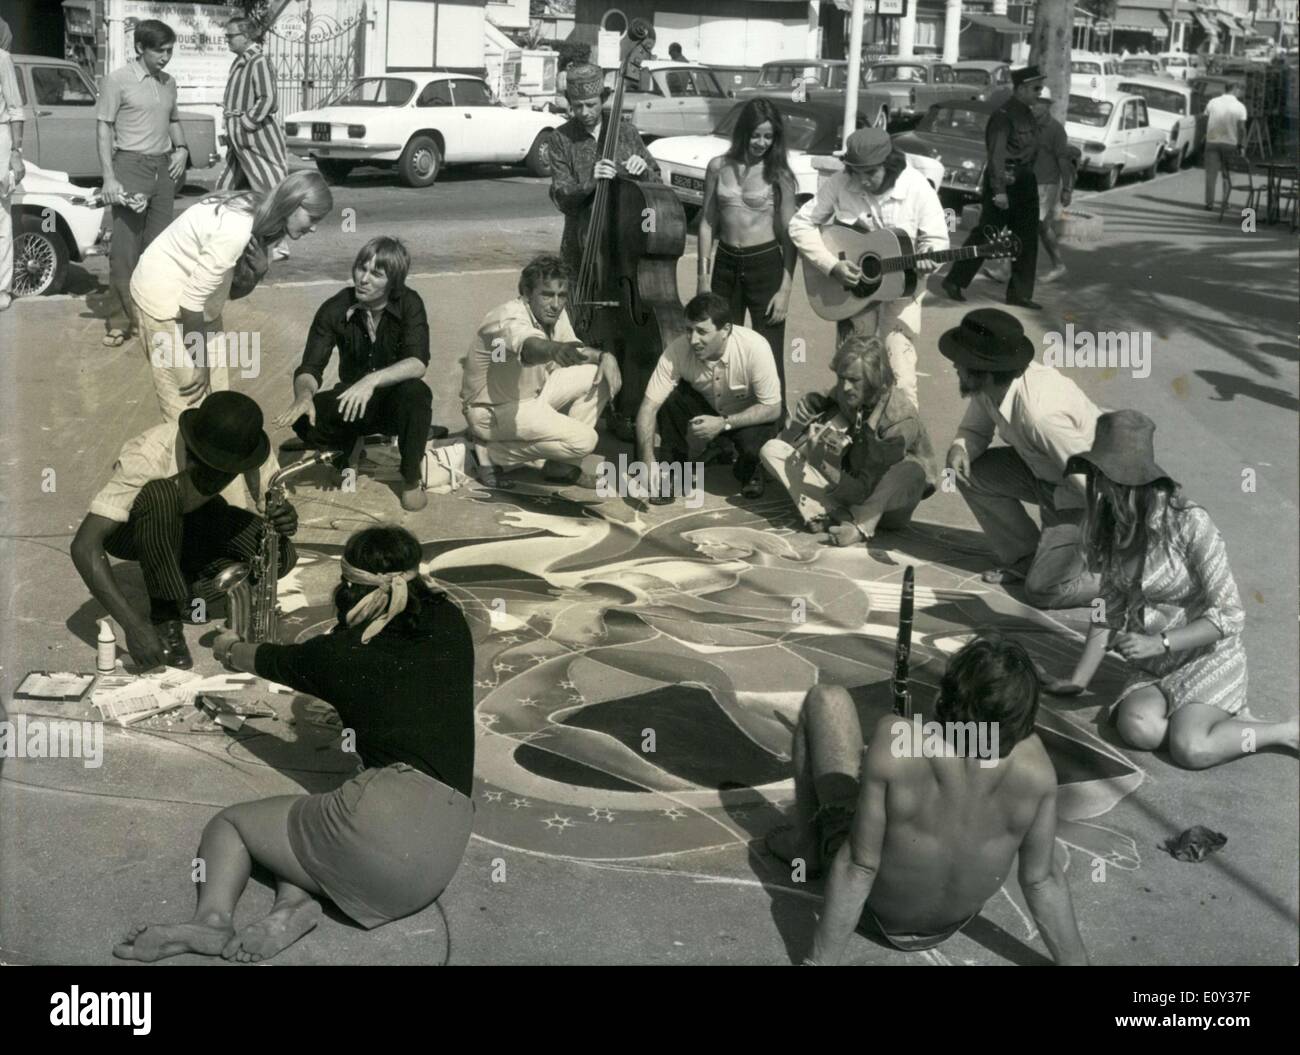 Sep. 14, 1968 - Raymond Moretti, a painter who is know all over the world, has abandoned his luxurious career to paint on the sidewalks of Juan-les-Pins. He is doing it for a movie called ''Le Temps Fou'' that Marcel Camus is currently filming on the French Riviera. Surrounded by beatniks and hippies, Raymond Moretti makes a drawing on the sidewalk in Juan-les-Pins. Stock Photo